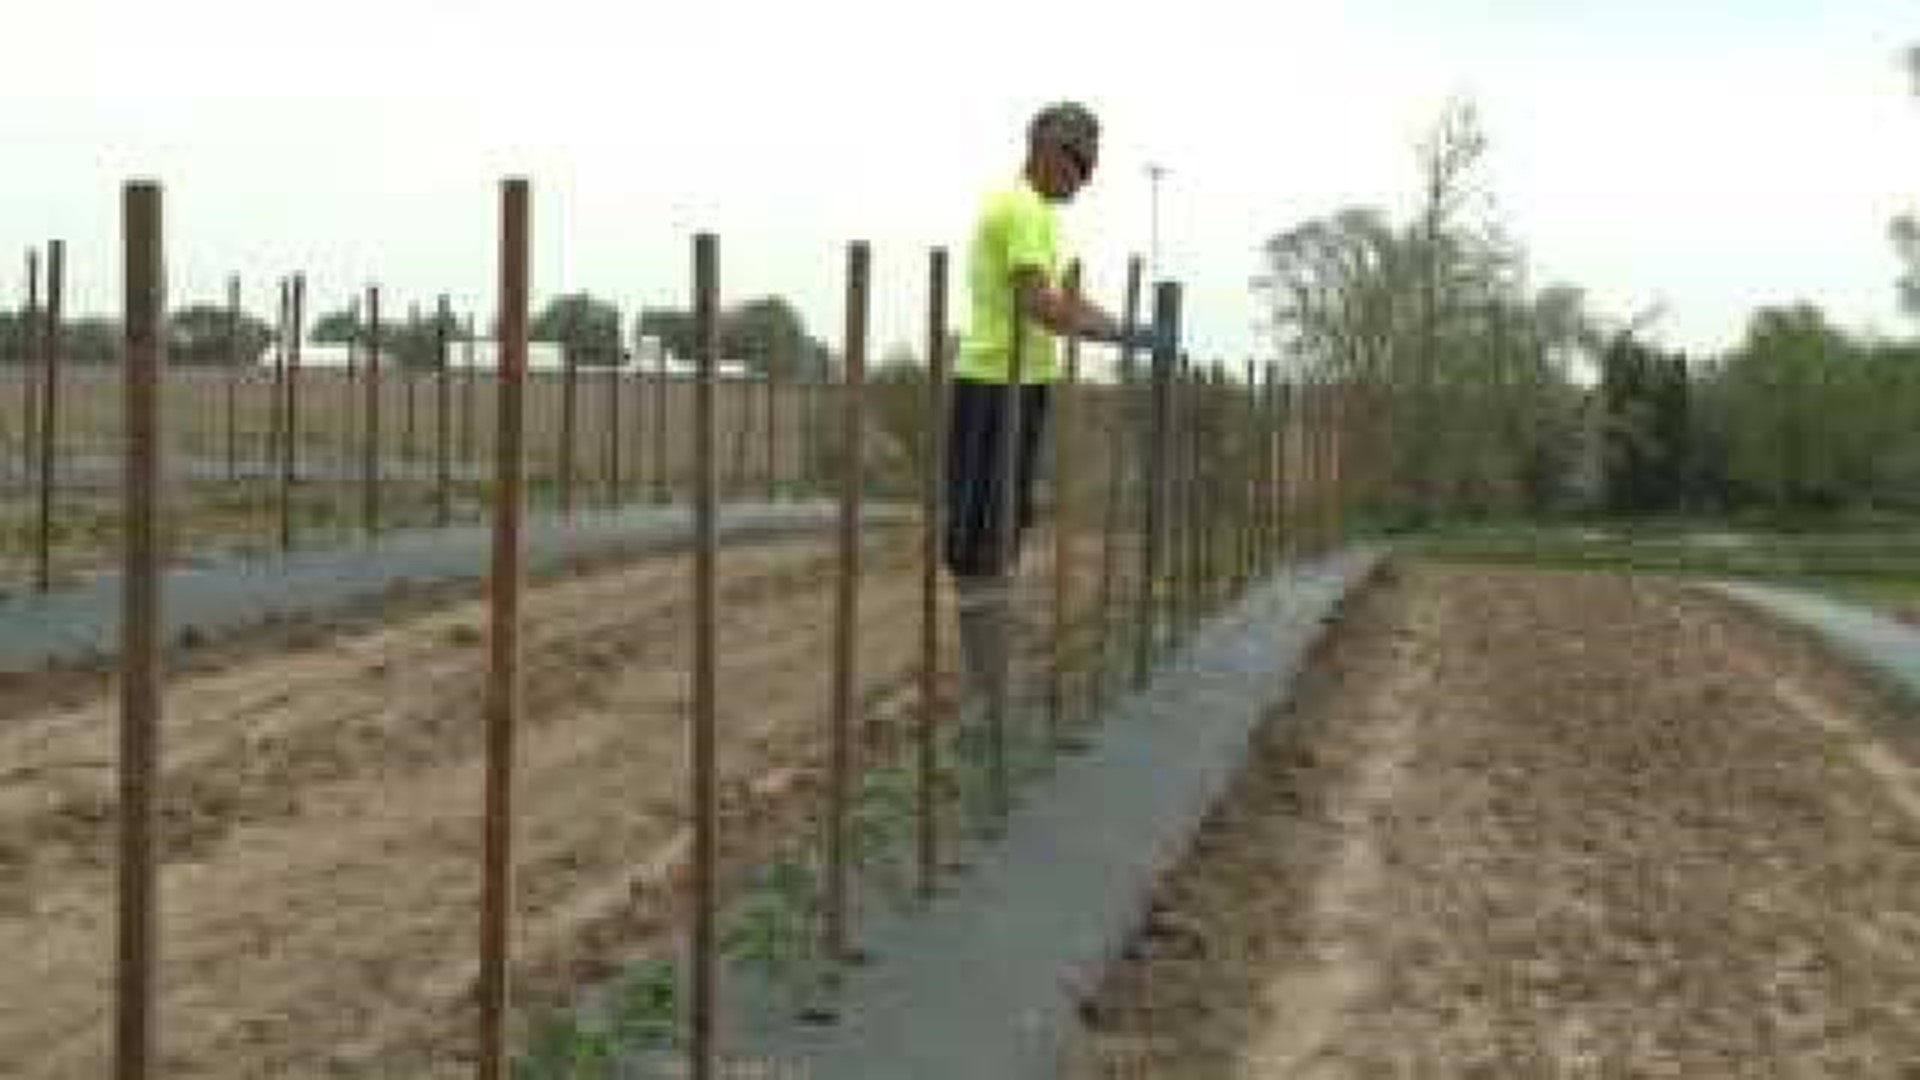 Weather causing small delays in spring planting